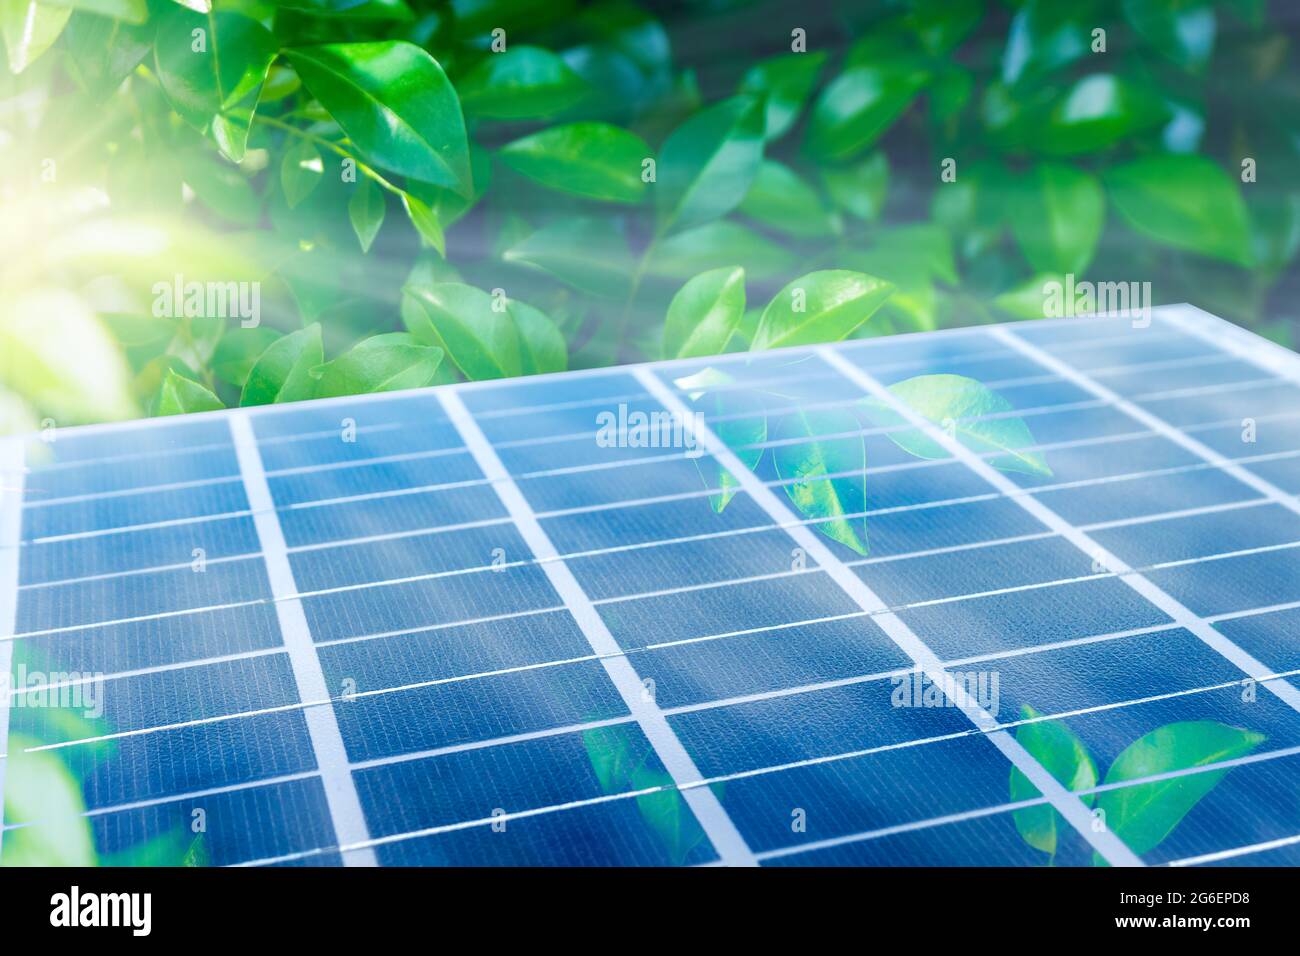 Solar panel among green leaves. Photovoltaic module as integrated into the ecosystem. Alternative Clean Green Energy concept. Stock Photo